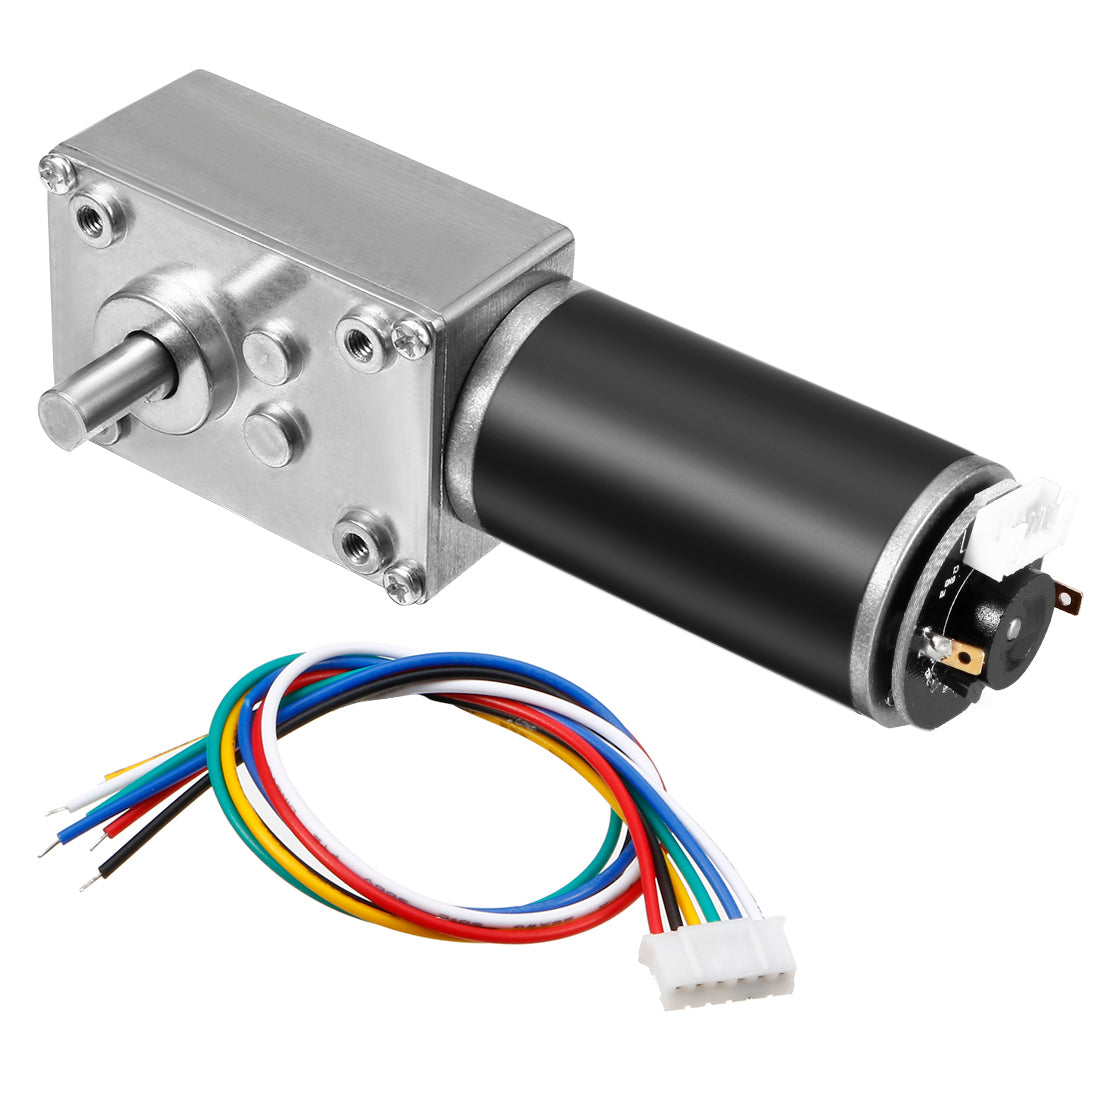 uxcell Uxcell DC 24V 15RPM 70Kg.cm Self-Locking Worm Gear Motor With Encoder And Cable, High Torque Speed Reduction Motor